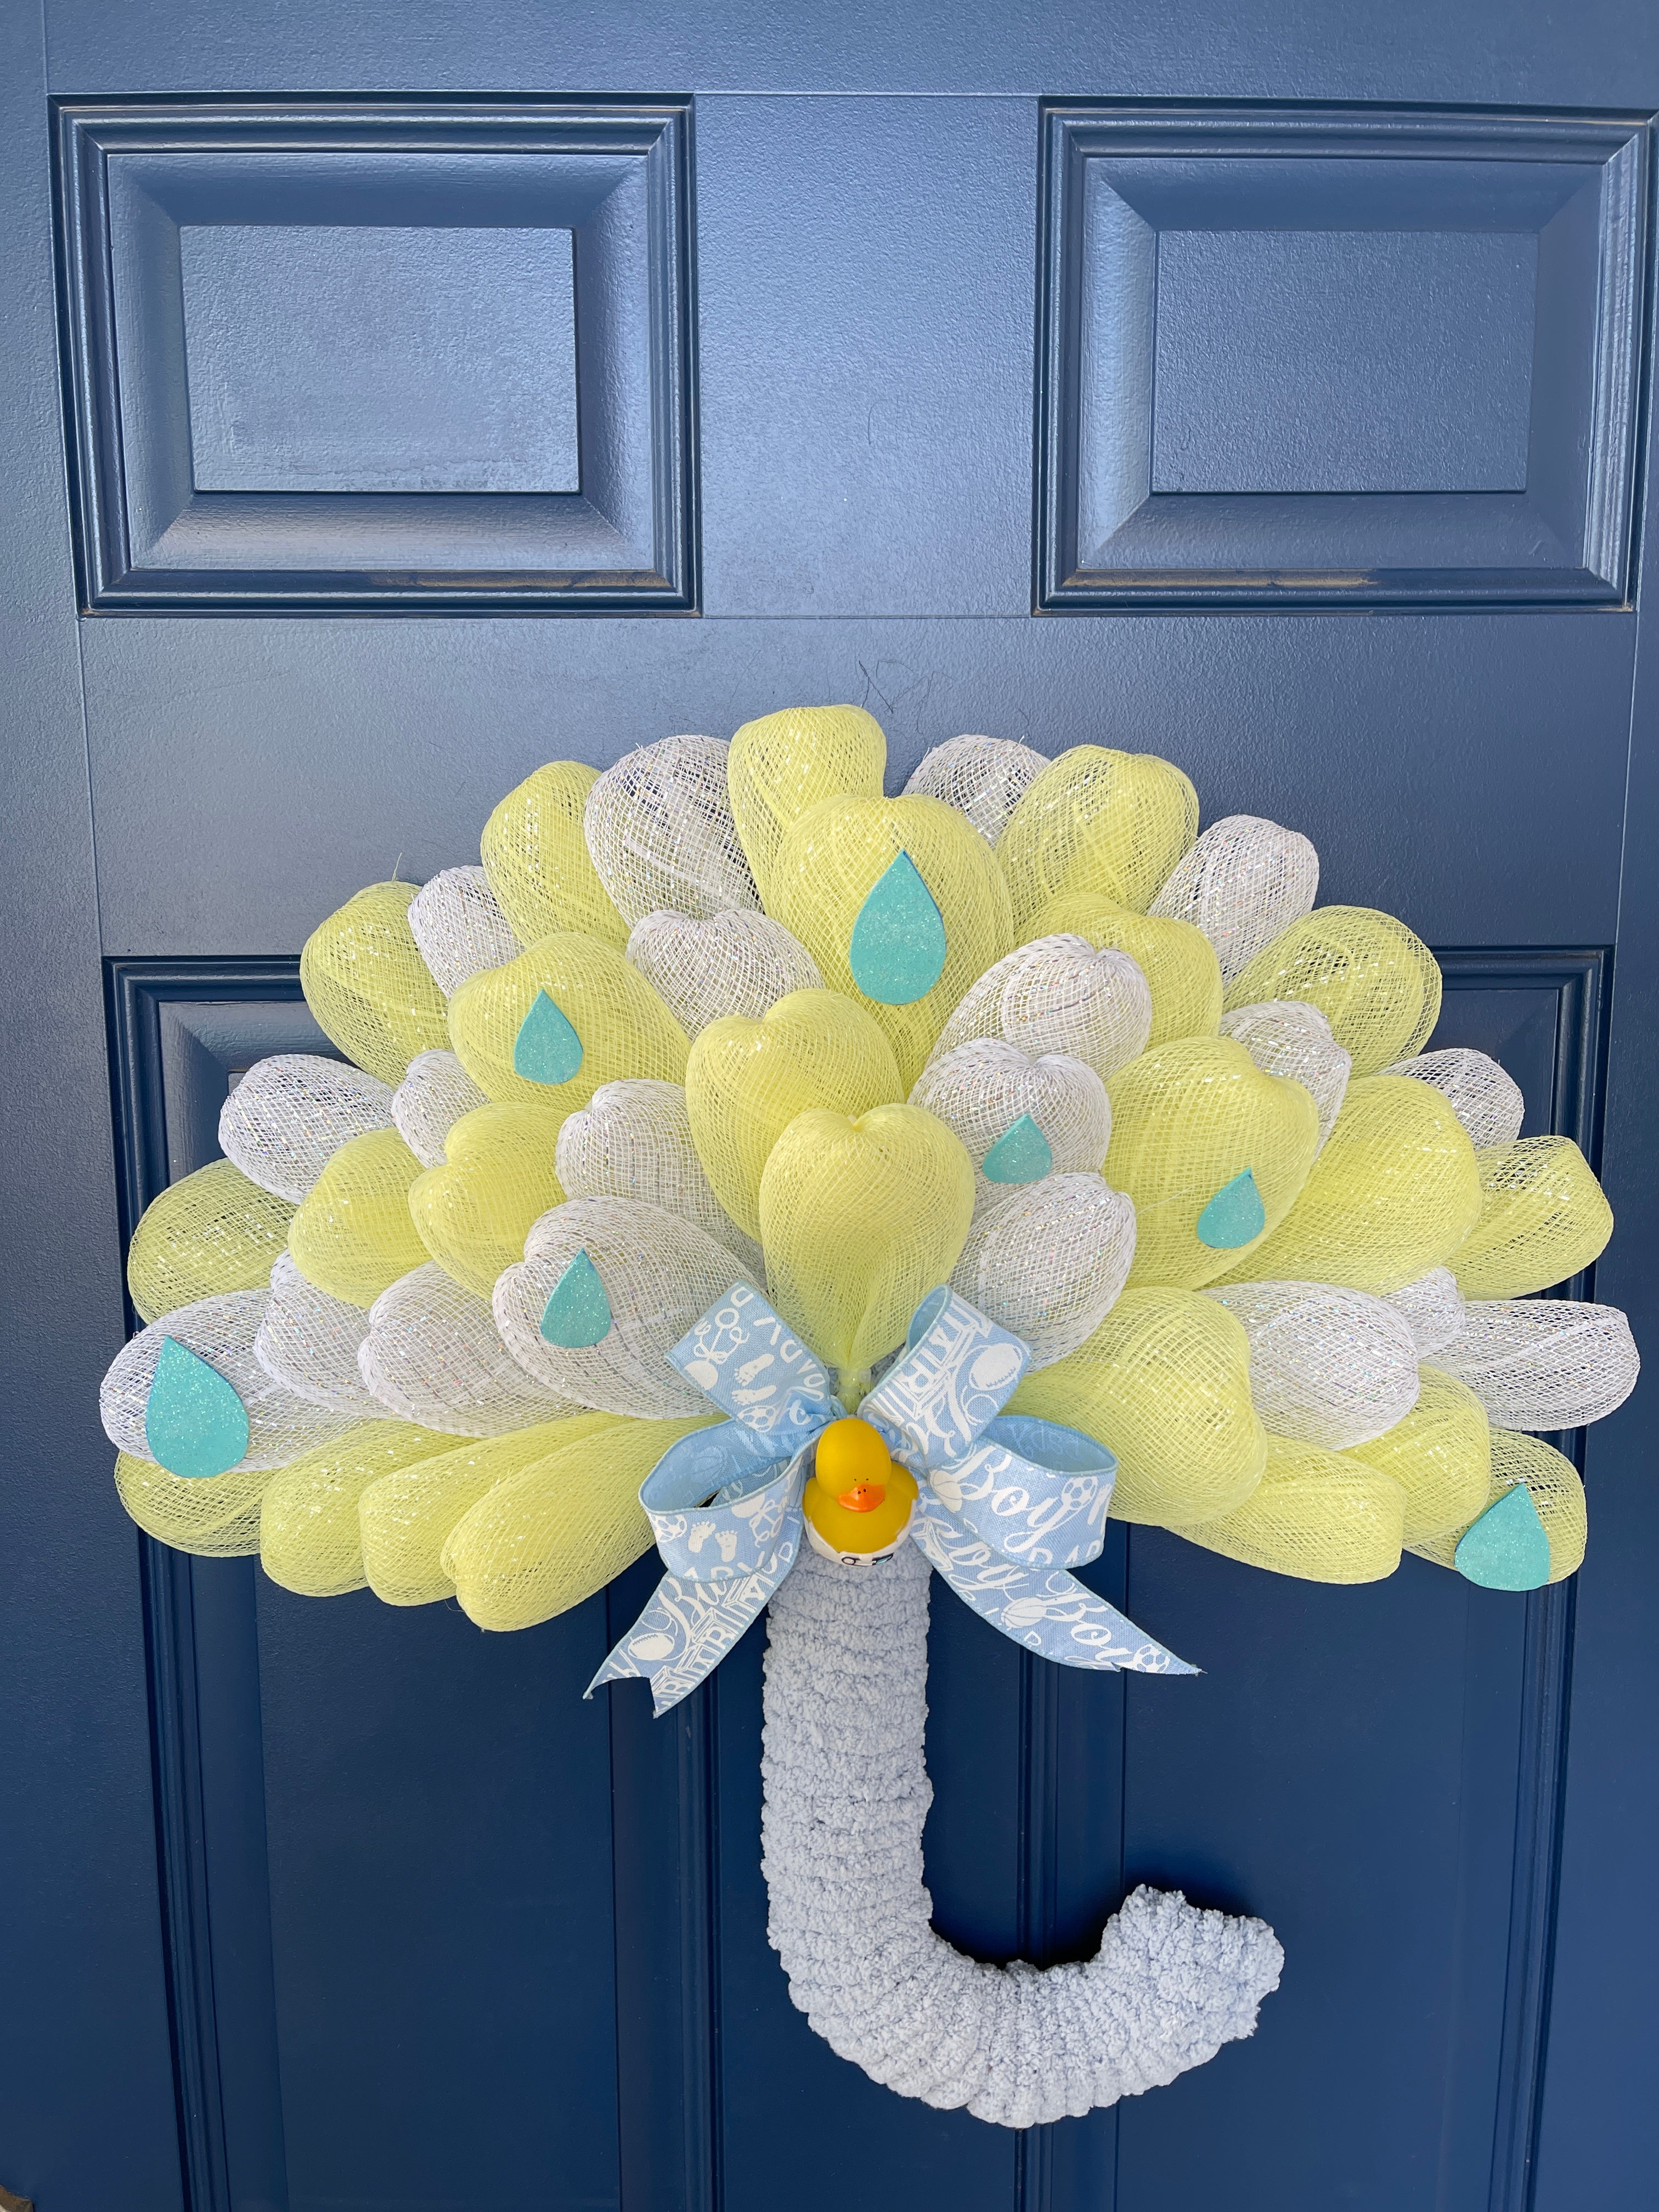 Top View of Blue, White and Yellow Deco Mesh Umbrella Wreath for Baby Boy Shower